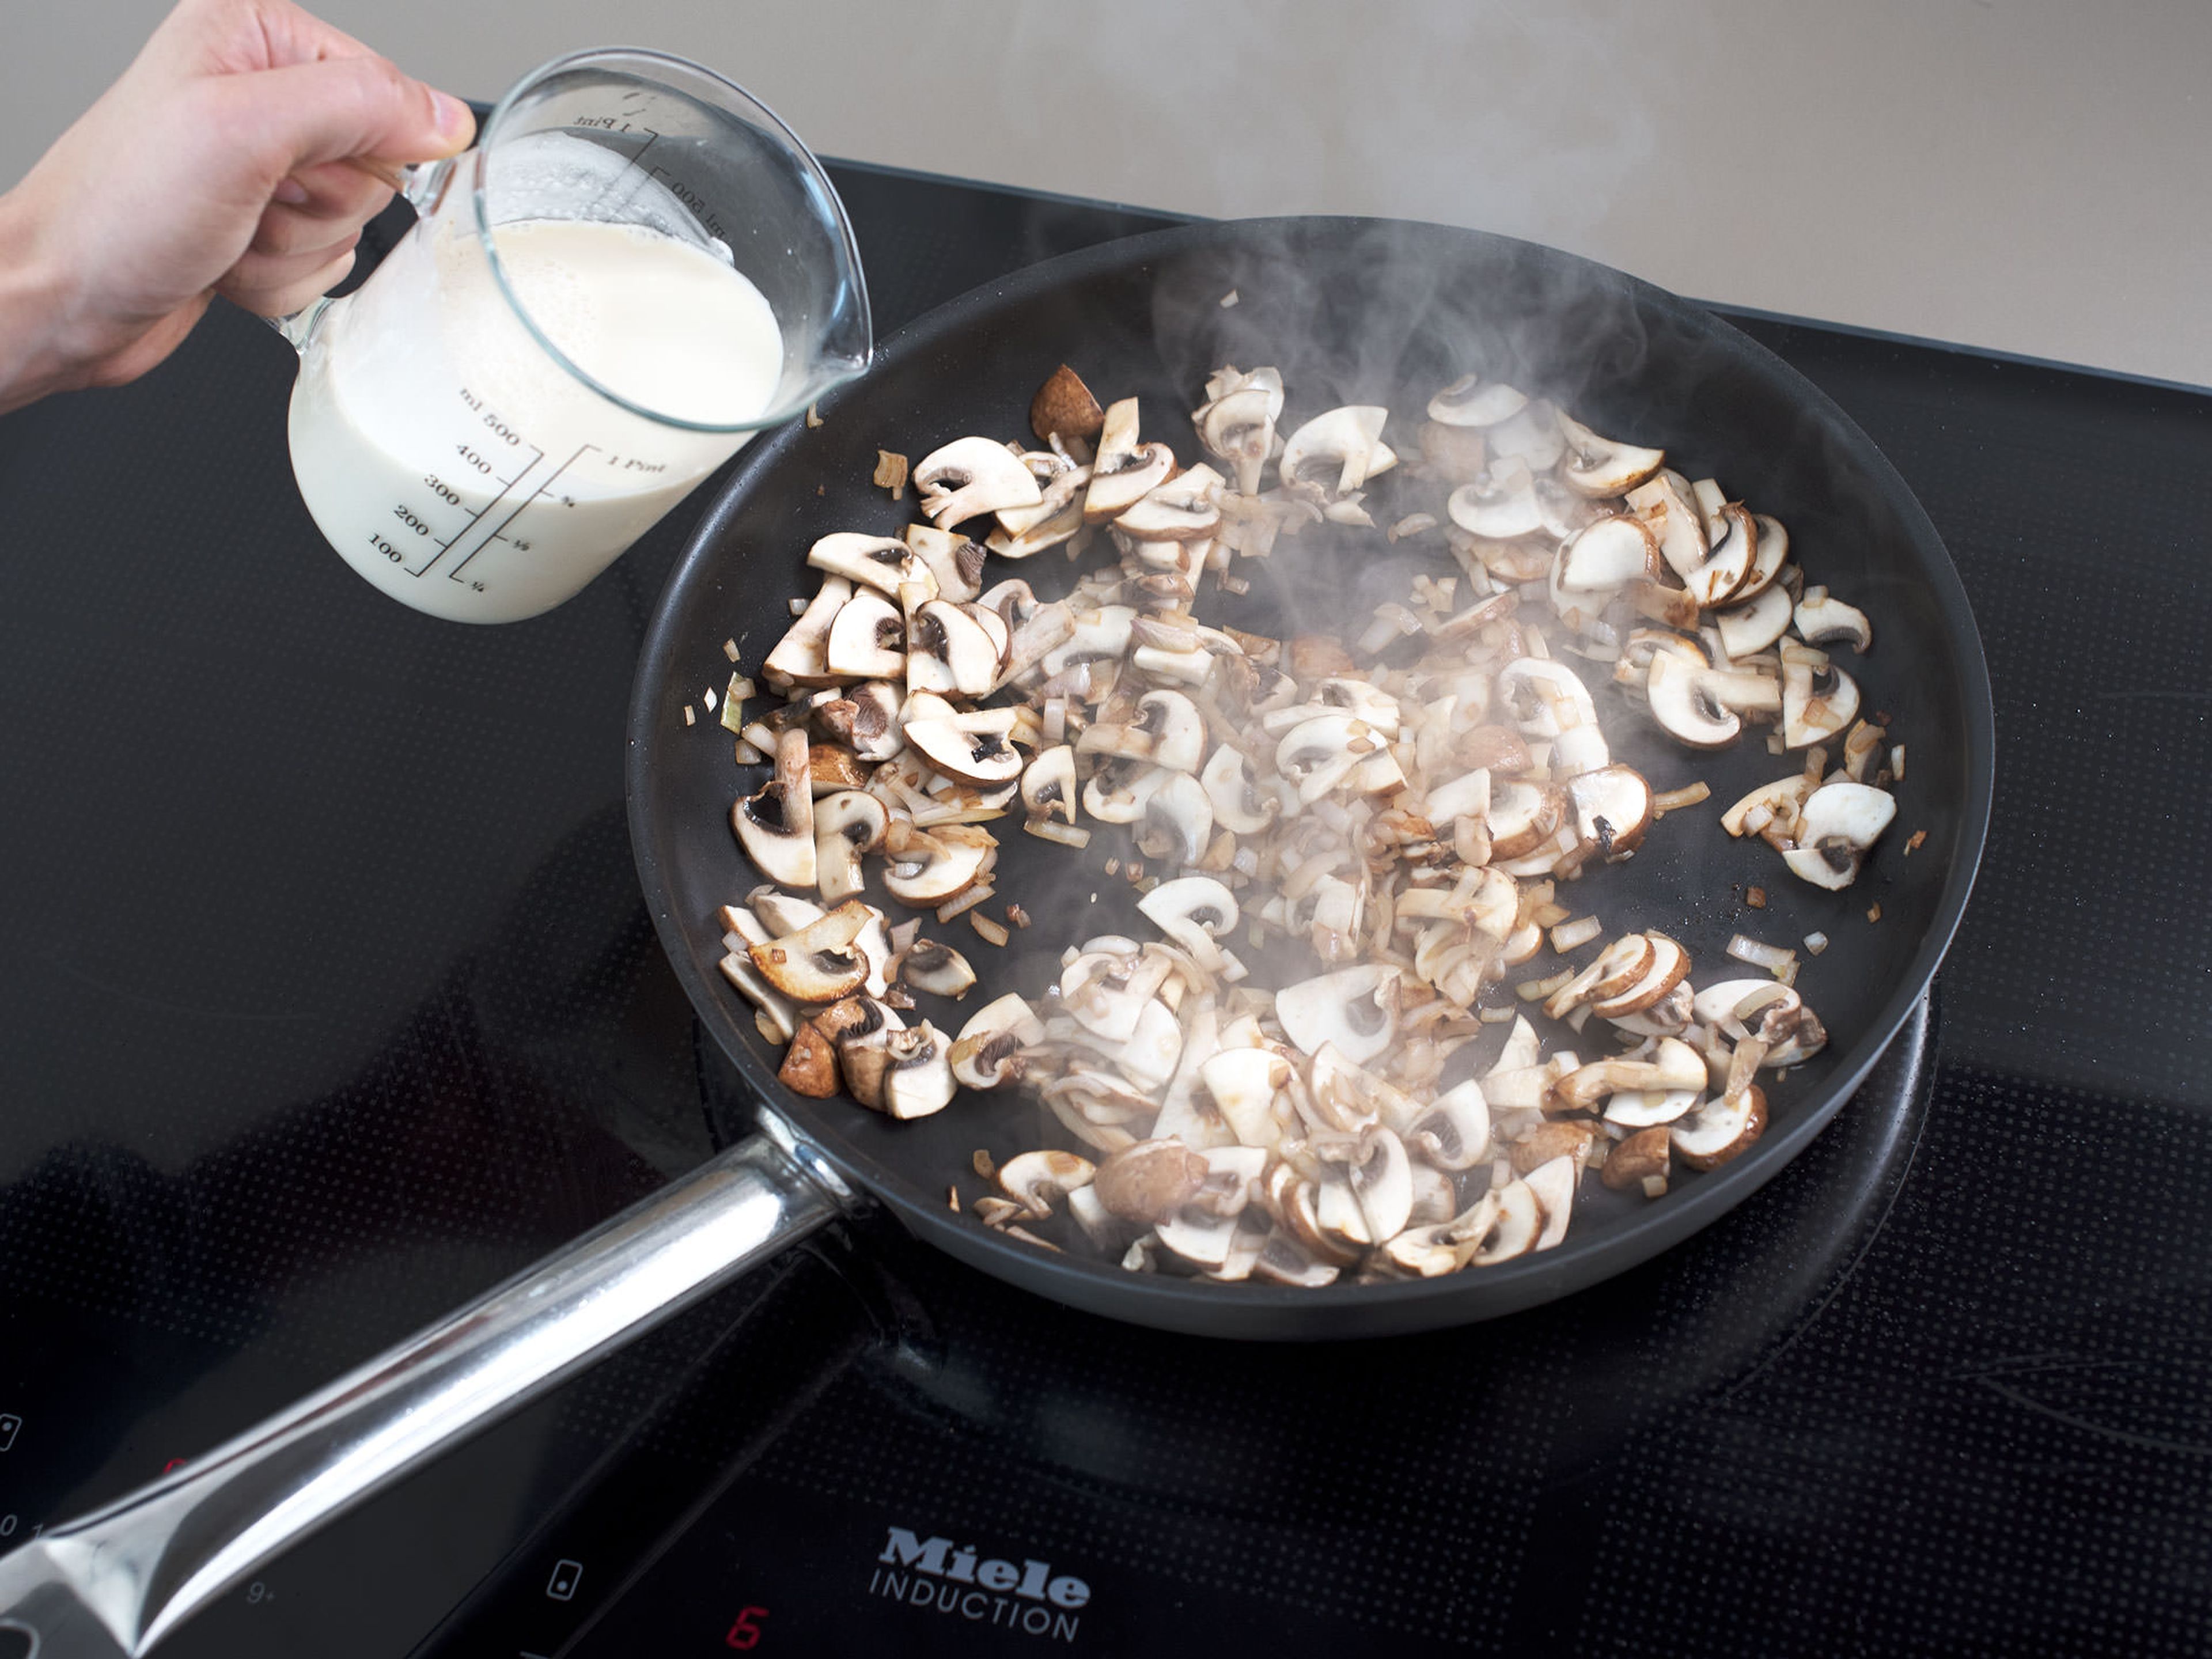 Add shallots and mushrooms to the pan, turn down heat to medium, and sauté for approx 5 min. Meanwhile, mix white wine, heavy cream, beef stock, and starch, and add to the pan. Stir until thickened slightly and heated through. Add meat back into pan and let simmer for approx. 2 min.